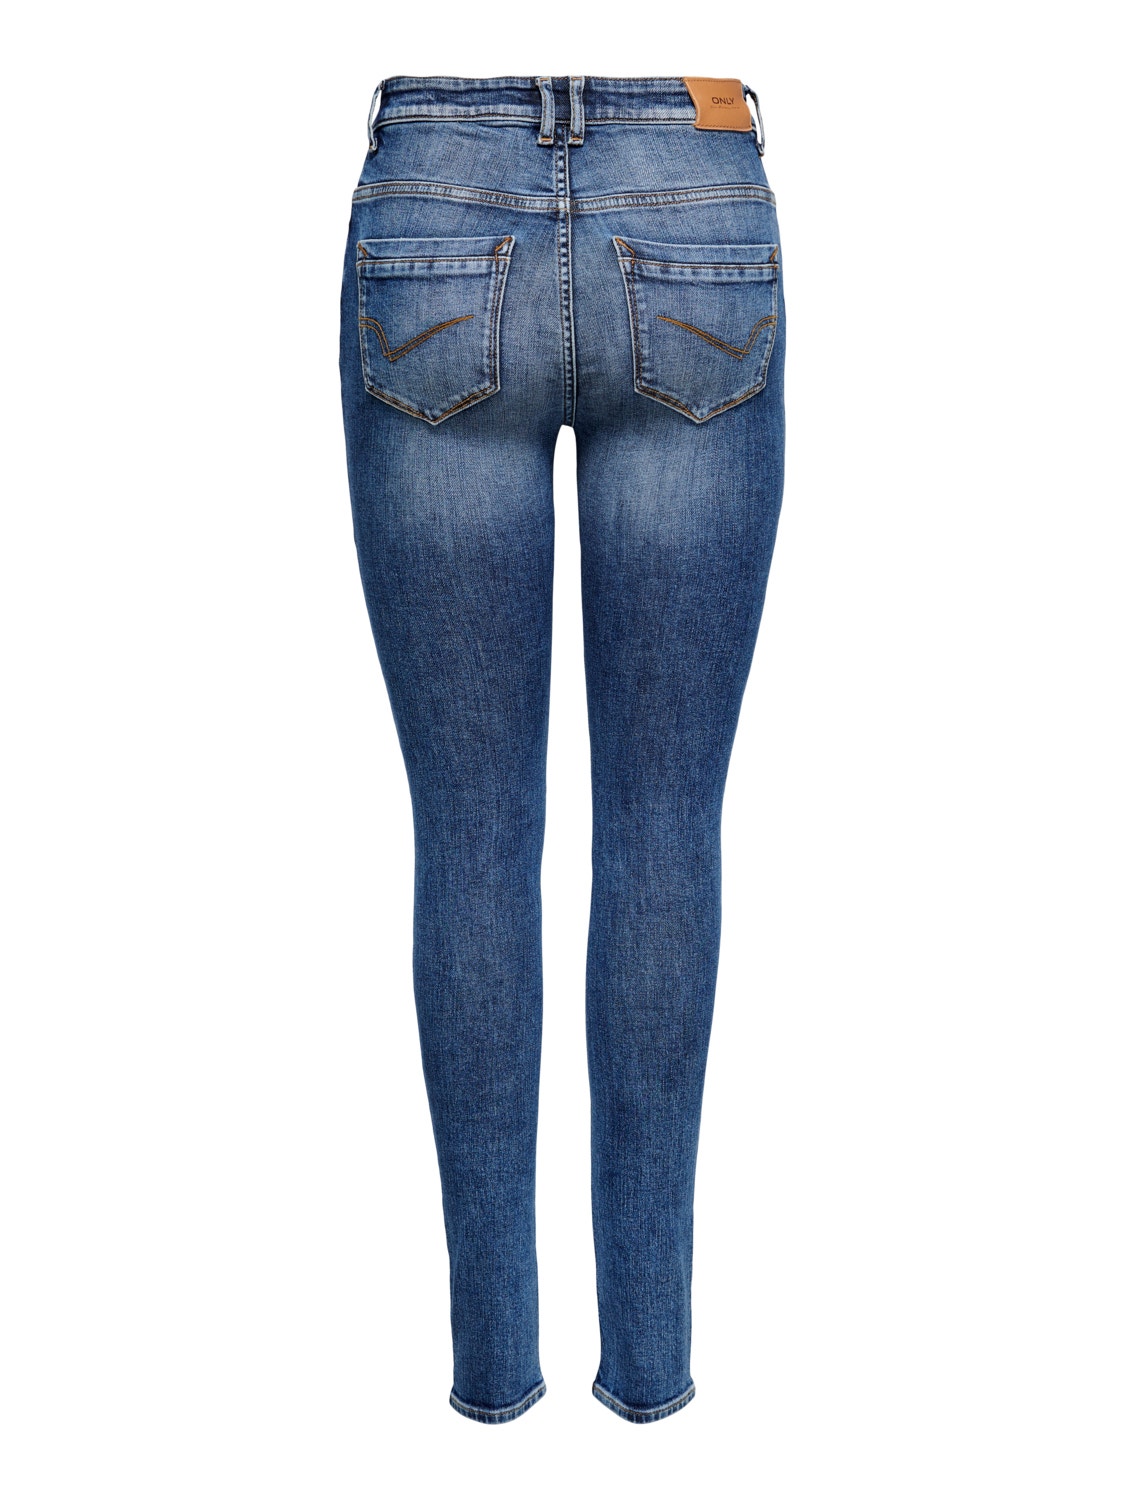 ONLY Skinny Fit Hohe Taille Jeans -Light Medium Blue Denim - 15241943